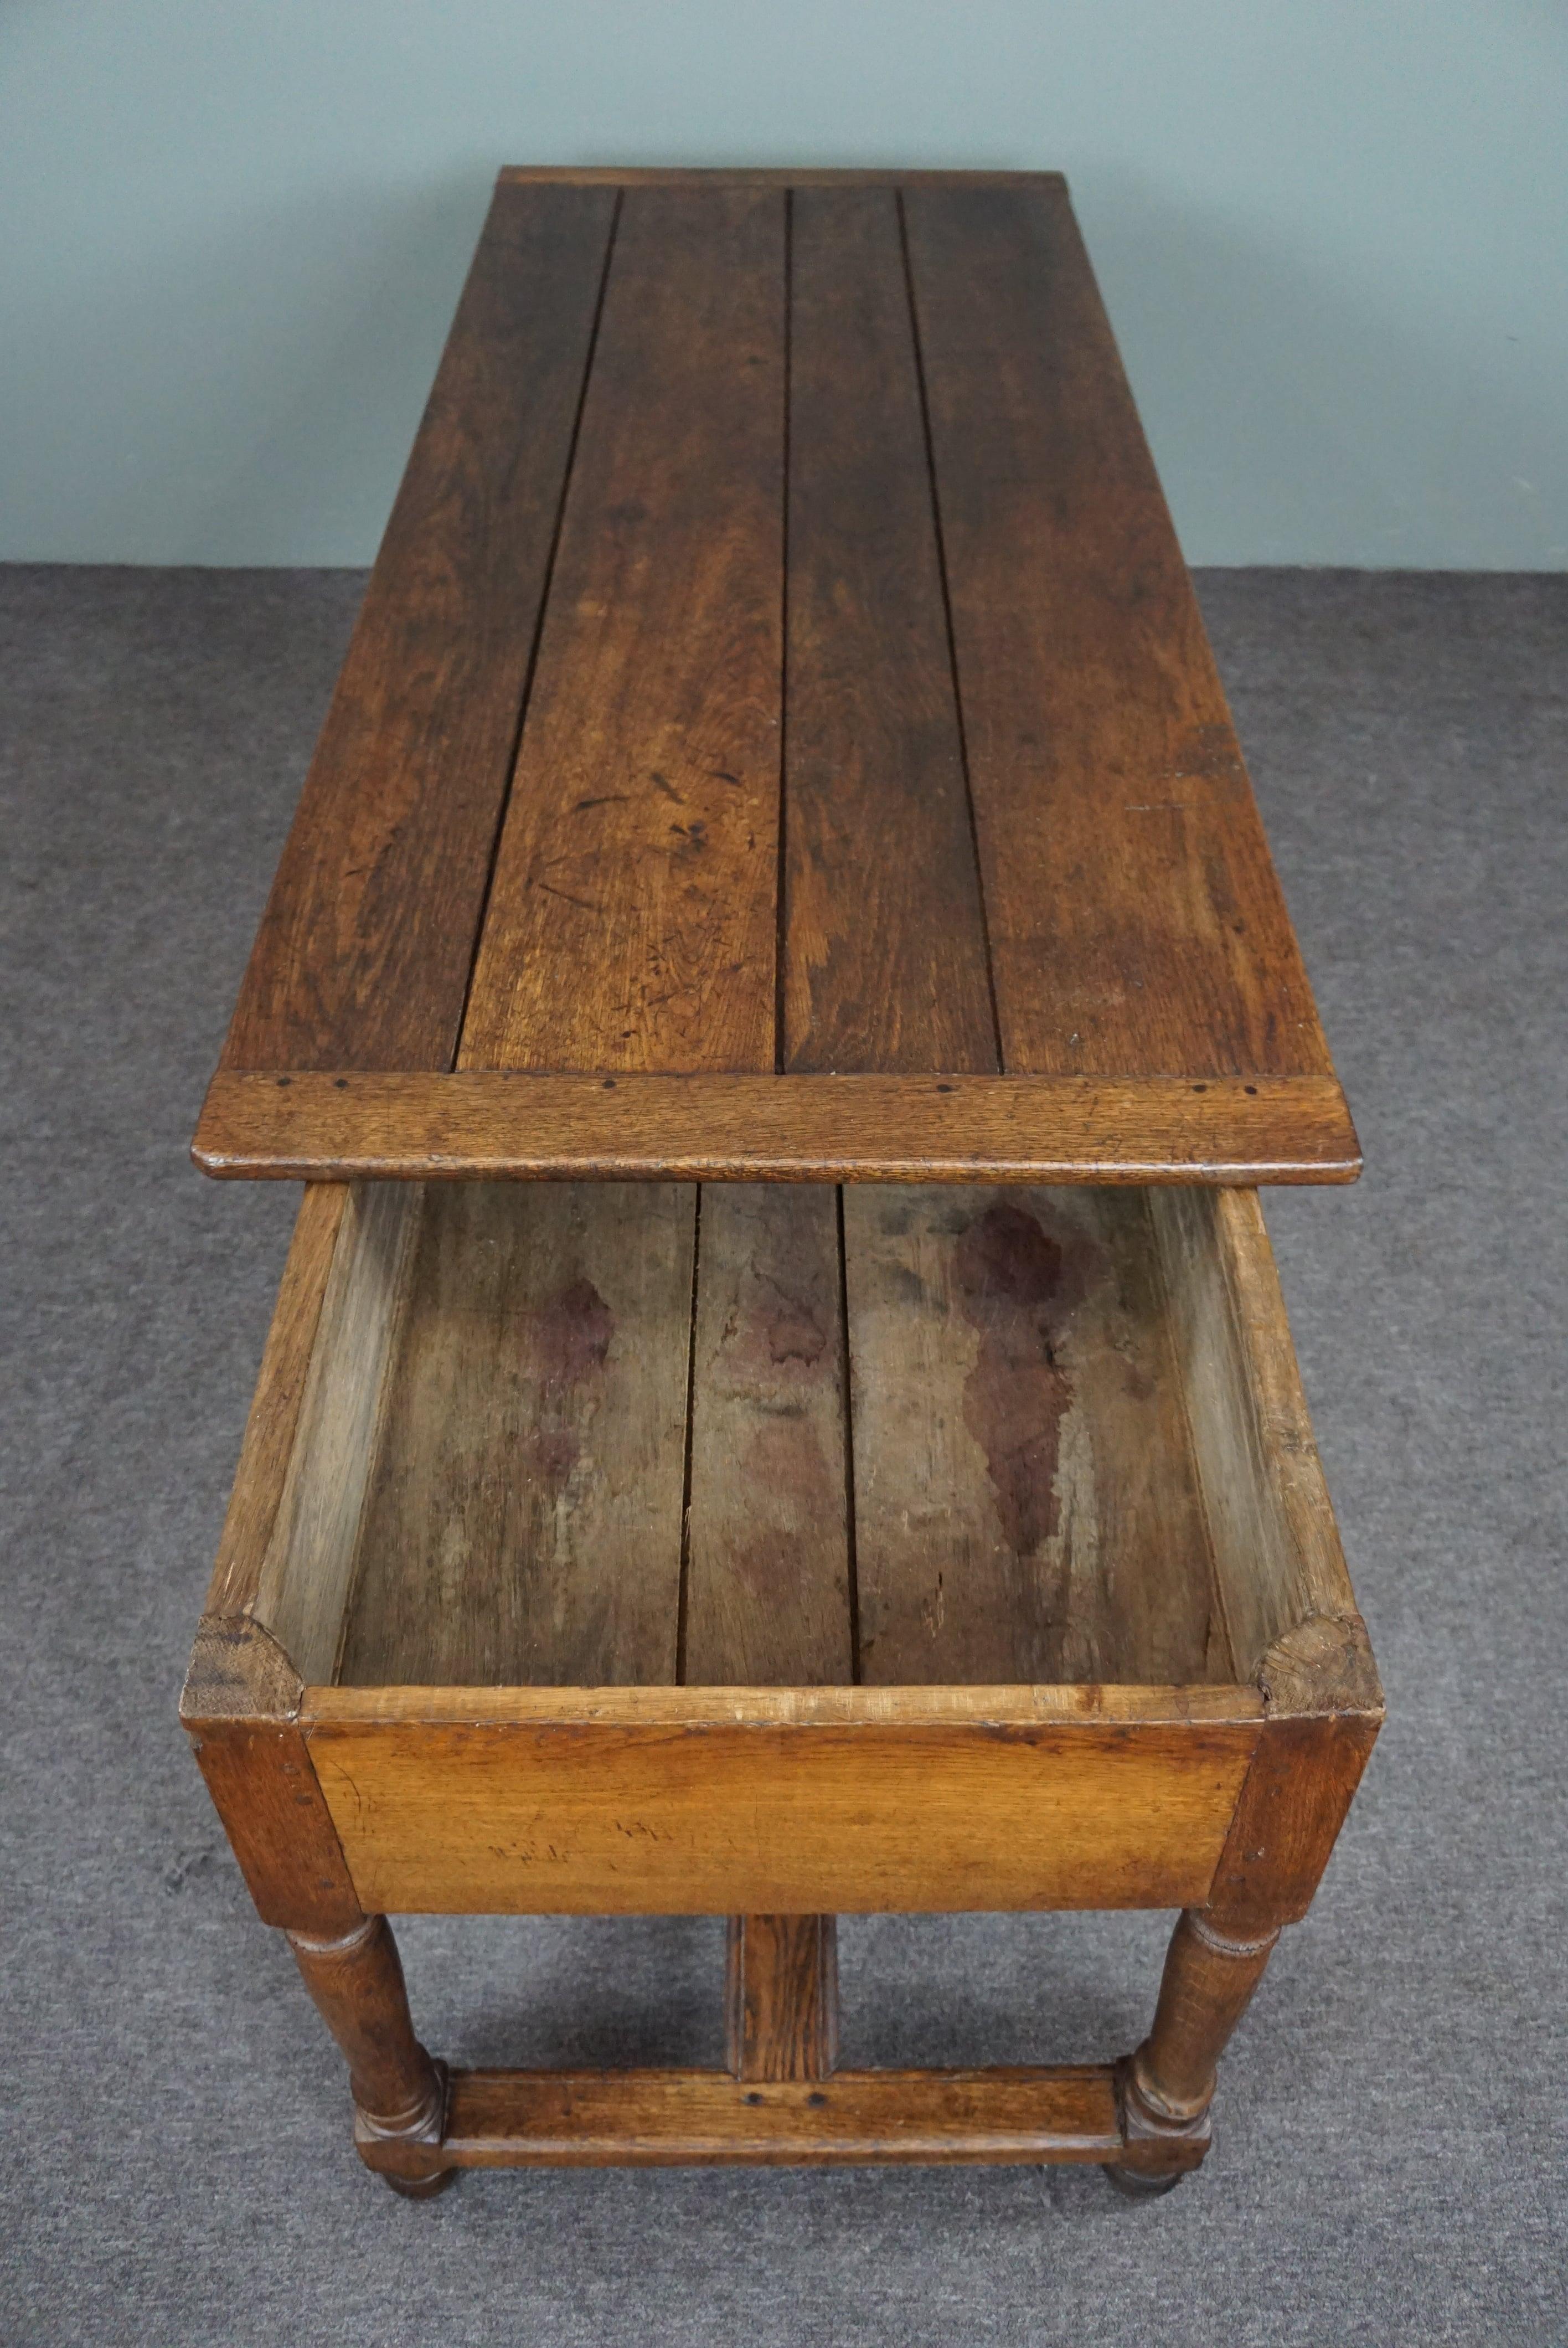 Wood Antique side table/sideboard with storage space under the top For Sale